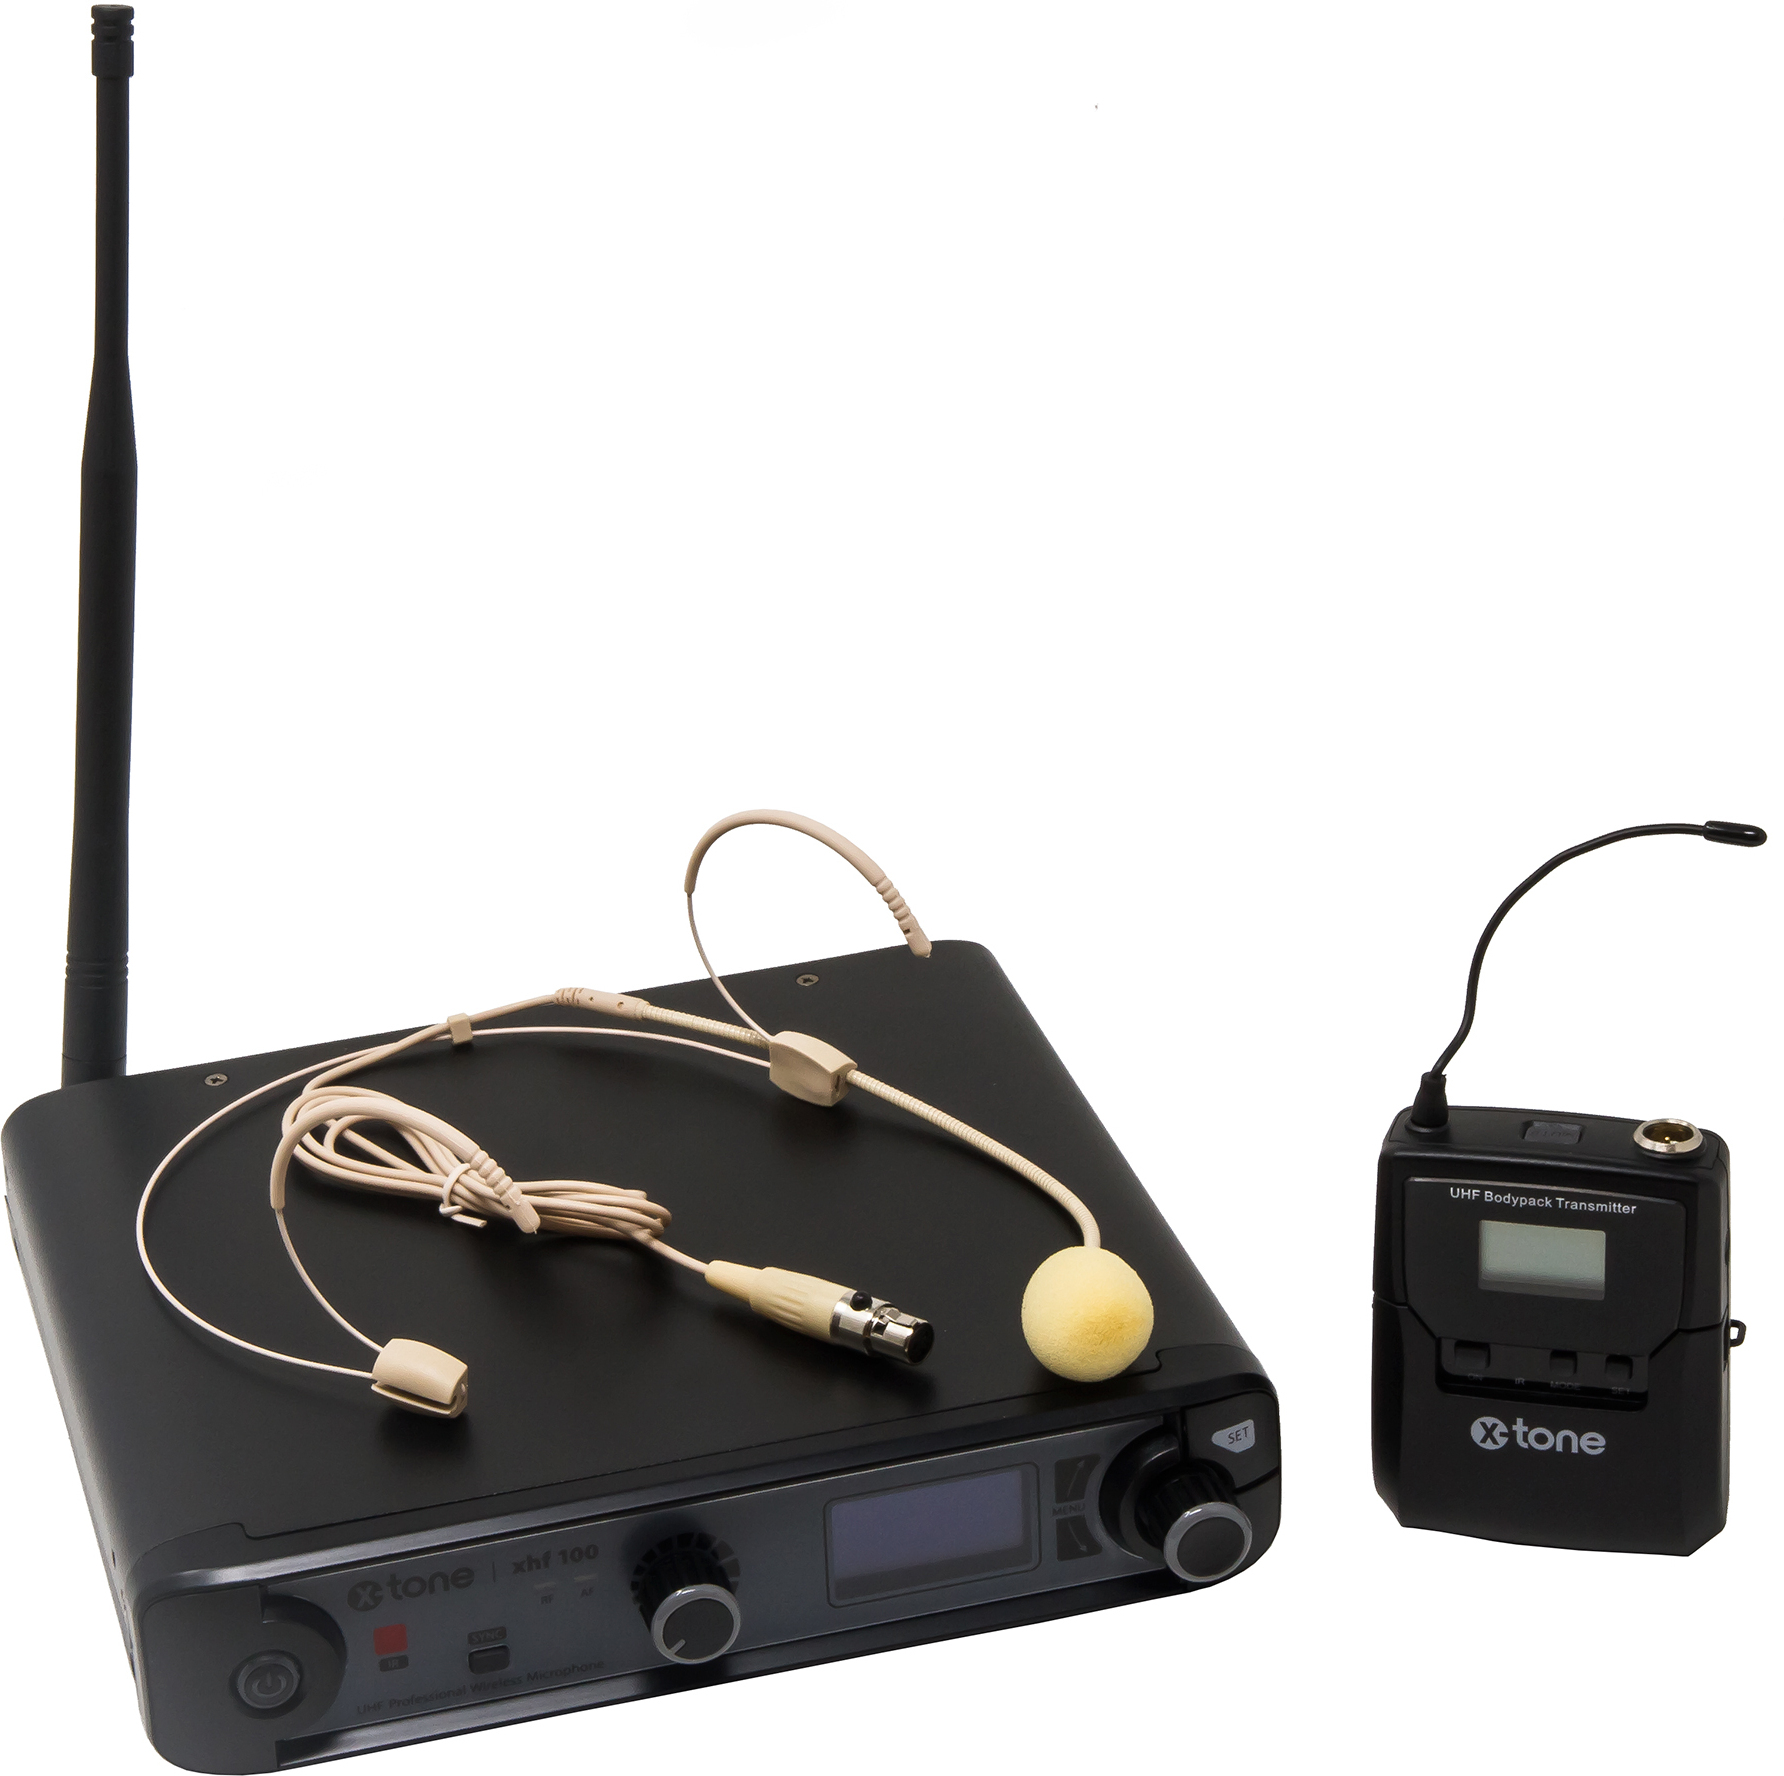 X-tone Xhf100h Systeme Hf Serre Tete Frequence Fixe - Wireless headworn microphone - Main picture